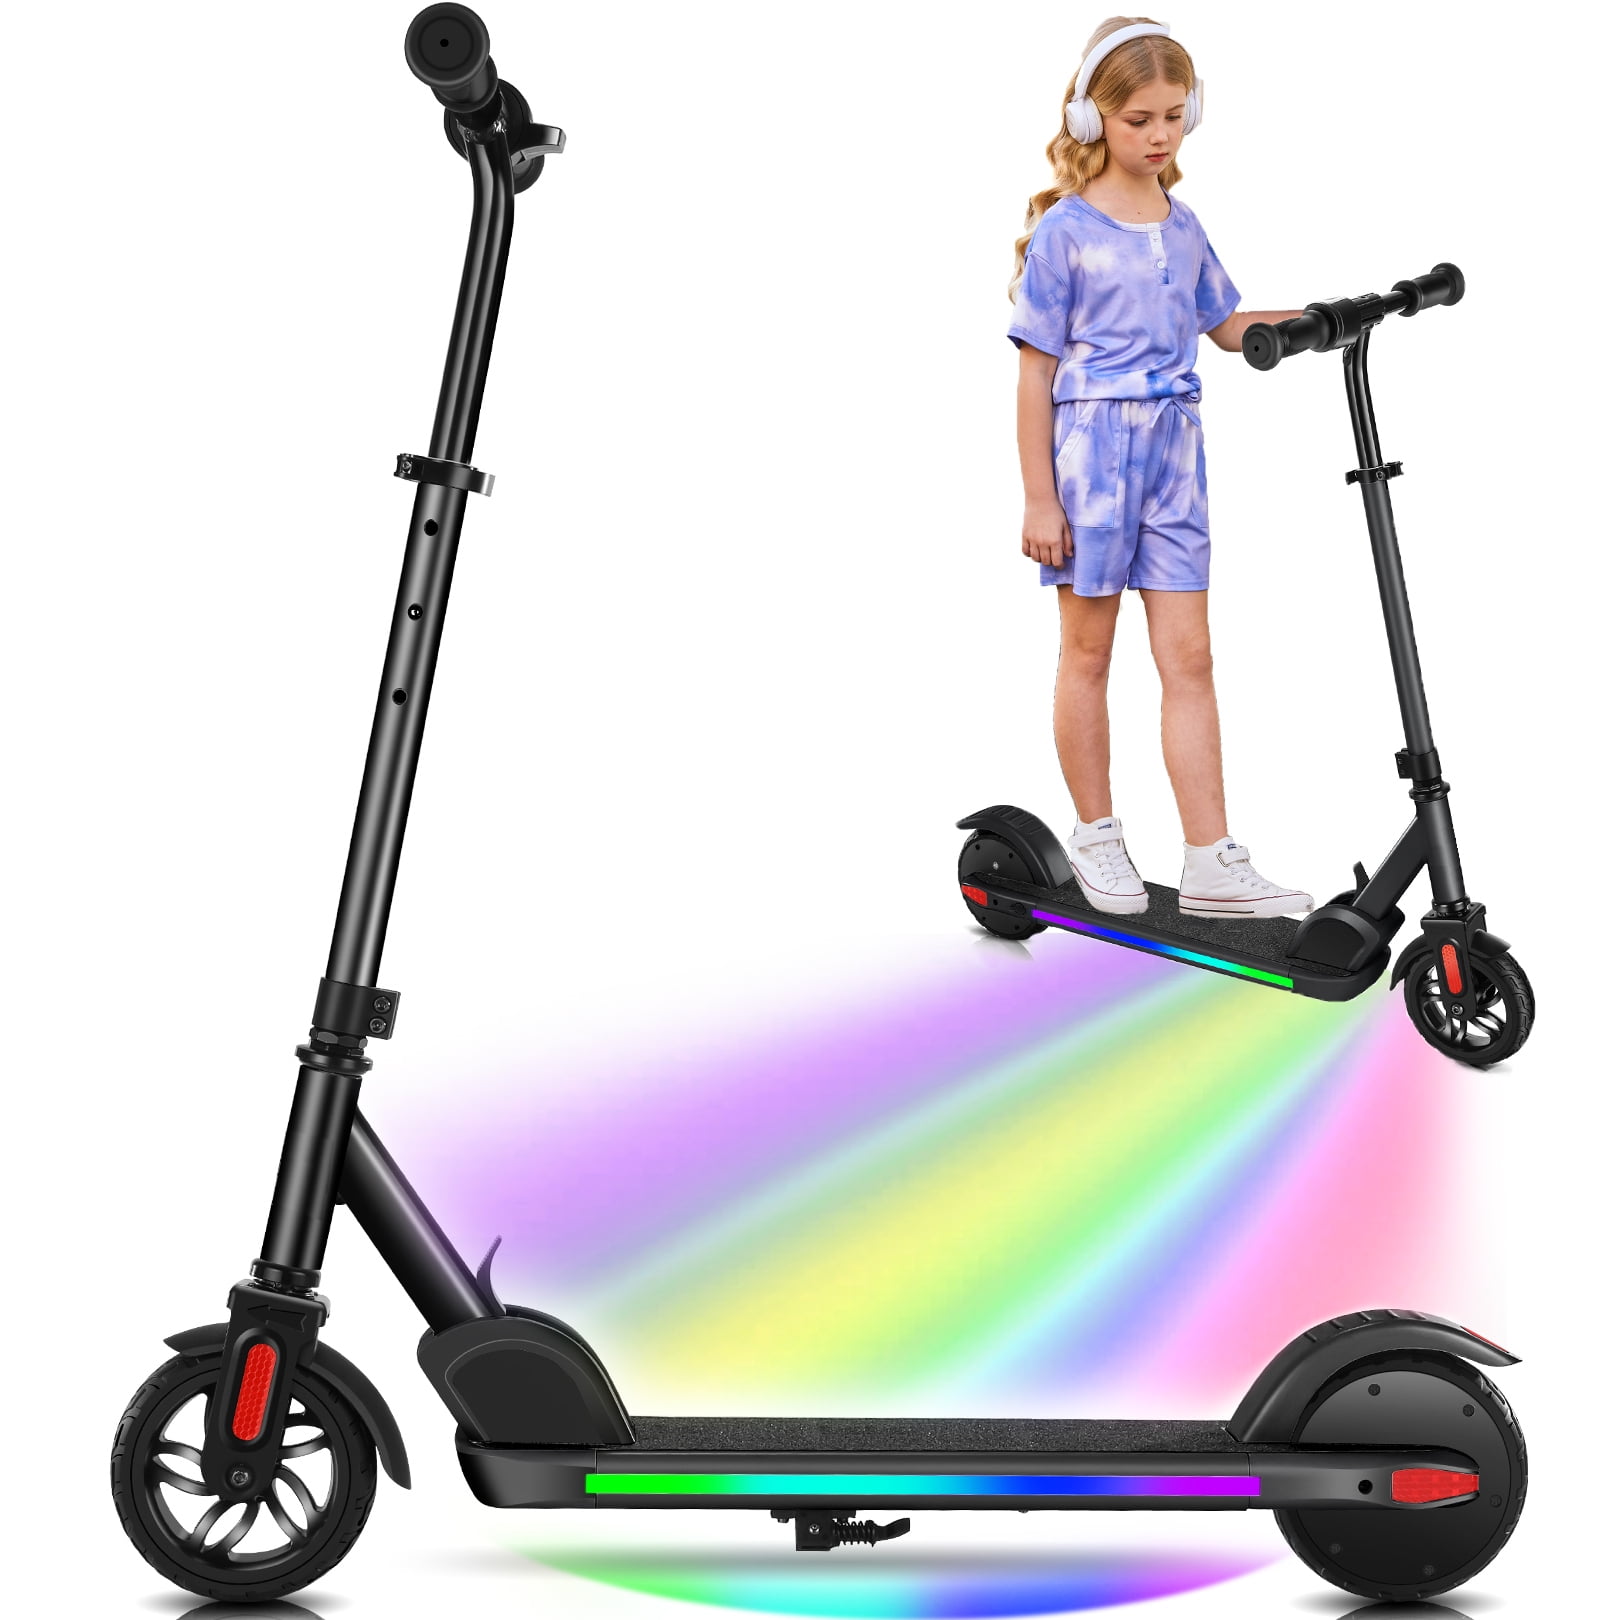 LED Light-Up Height Spinner Schwarz Activity Kids FAO Fun Kickstart Adjustable Razor White Red Striped for 3-Wheel Day/Night Outdoor with Play Scooter